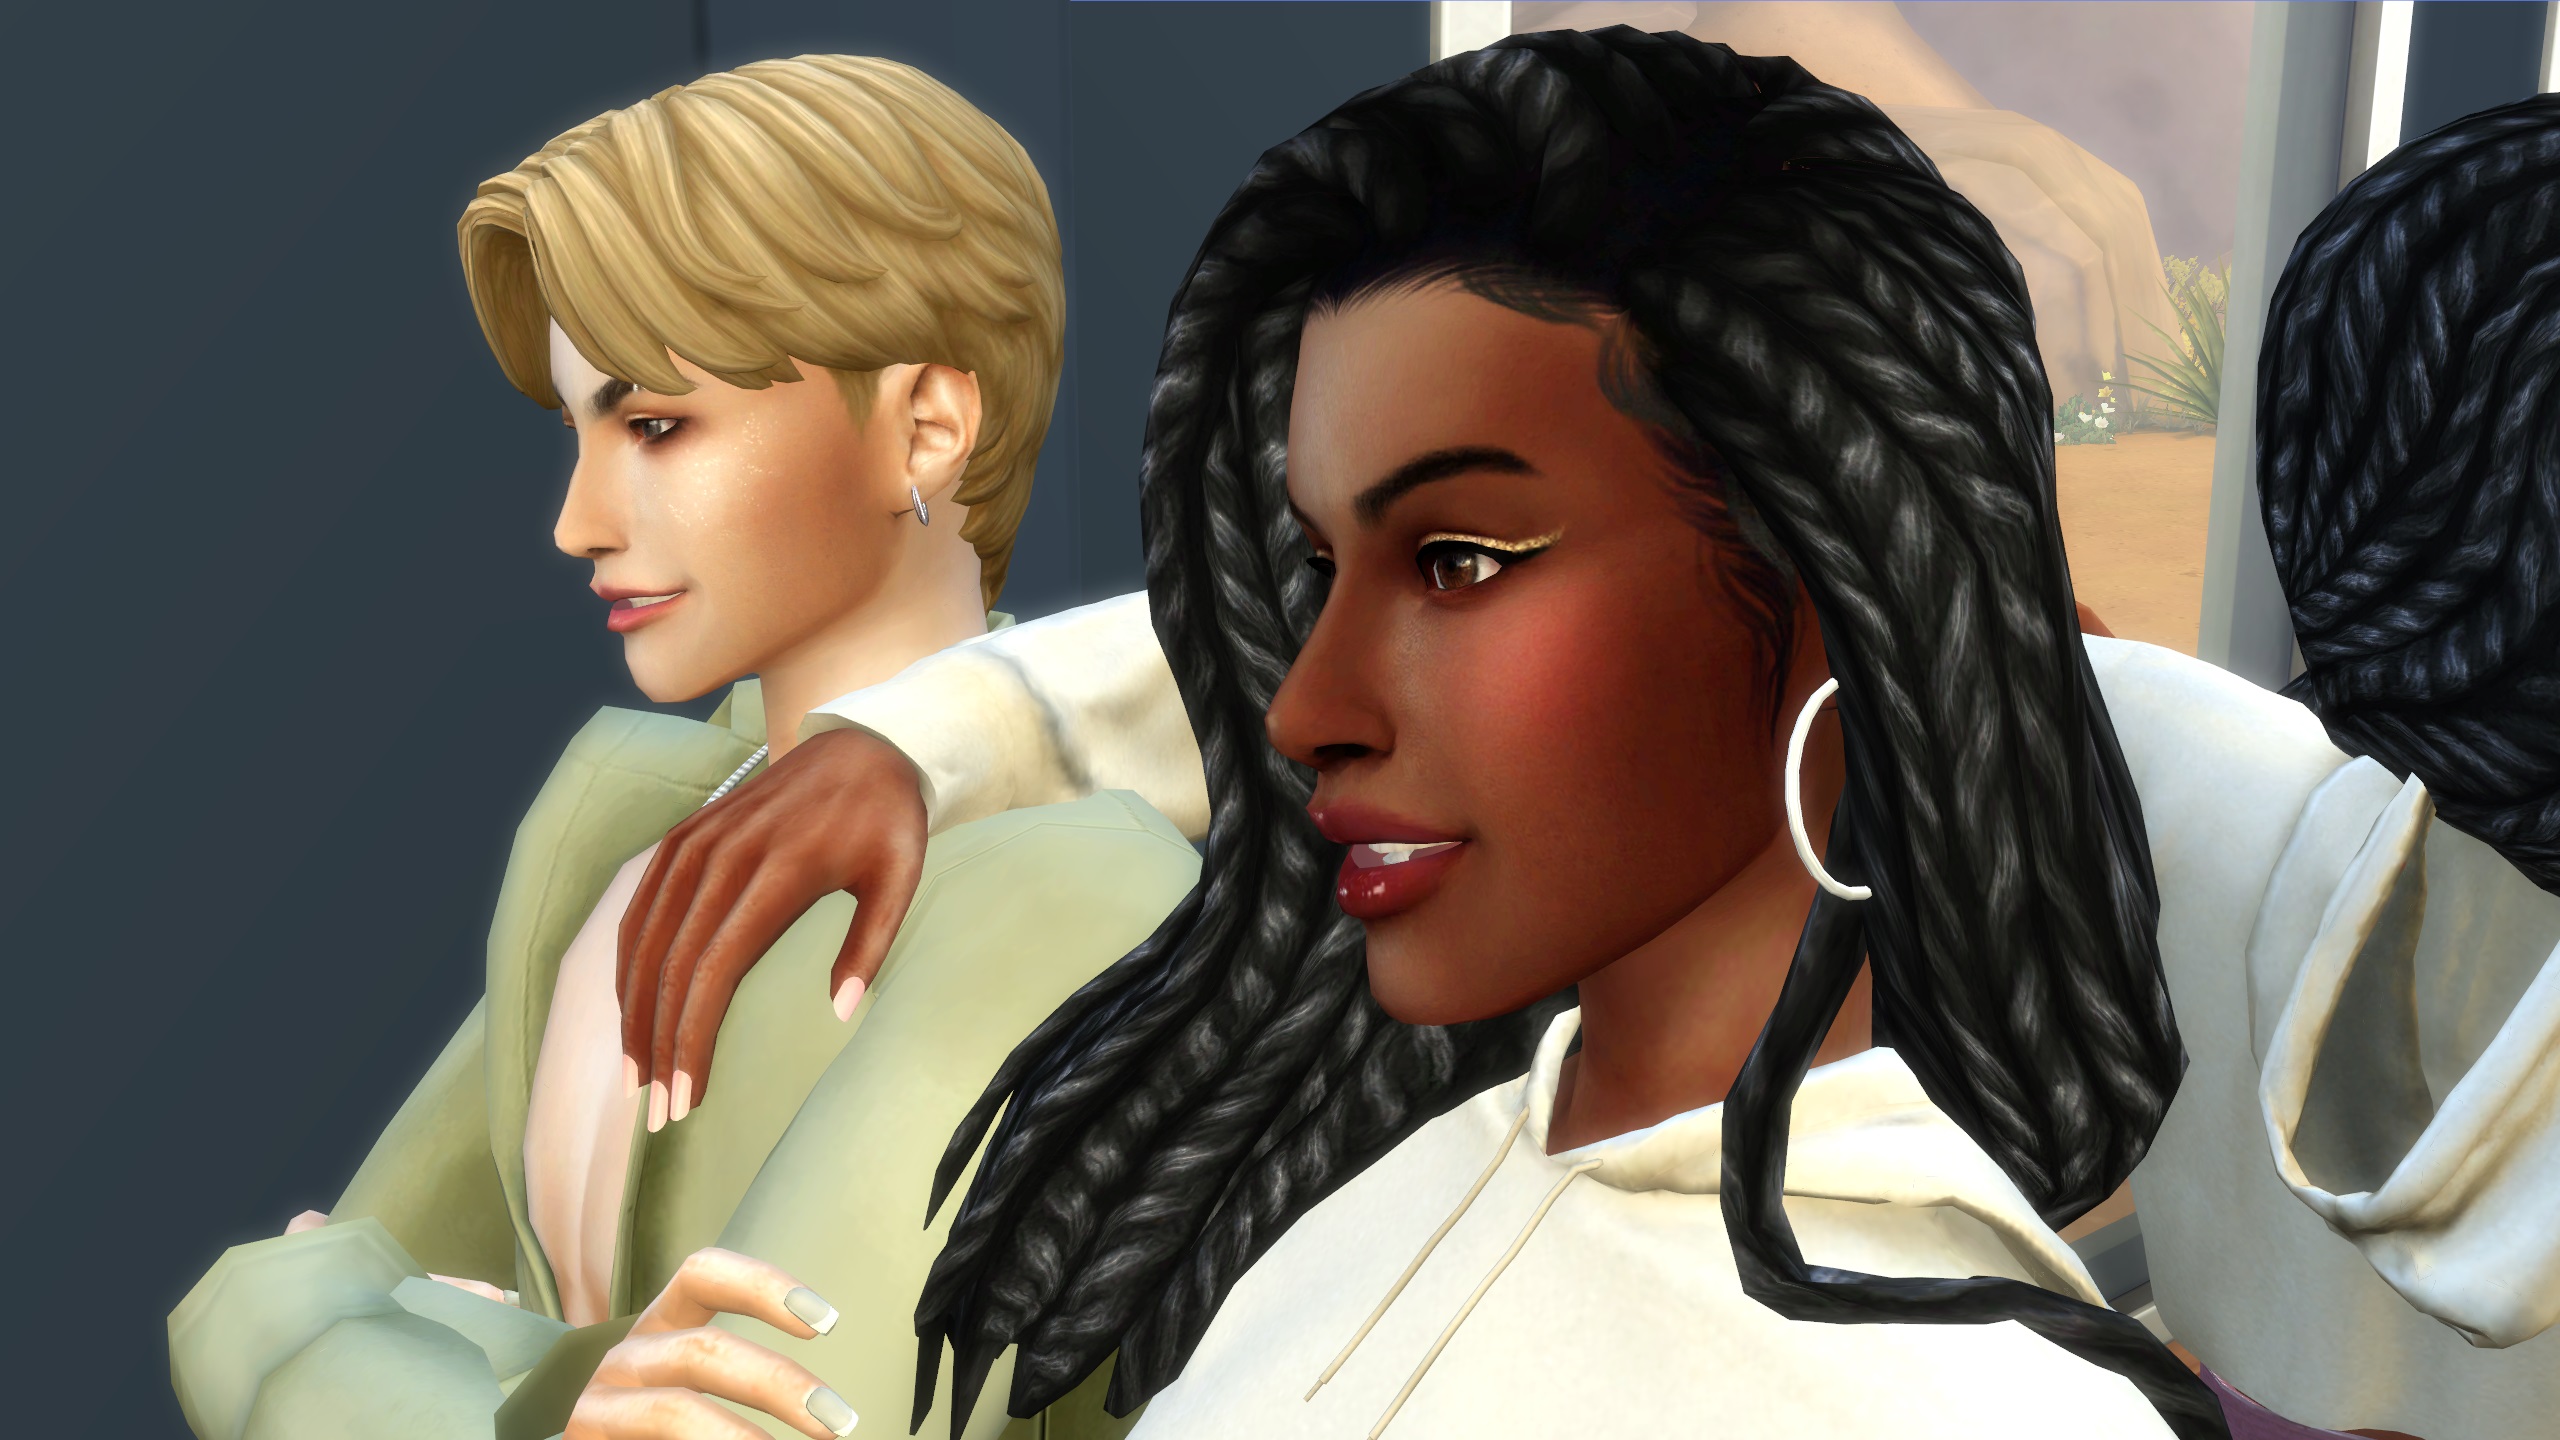 The Sims 4 CC - Two modded sims wearing makeup, glitter, eyeliner, with modded braids hairstyle and modded mens hairstyle.